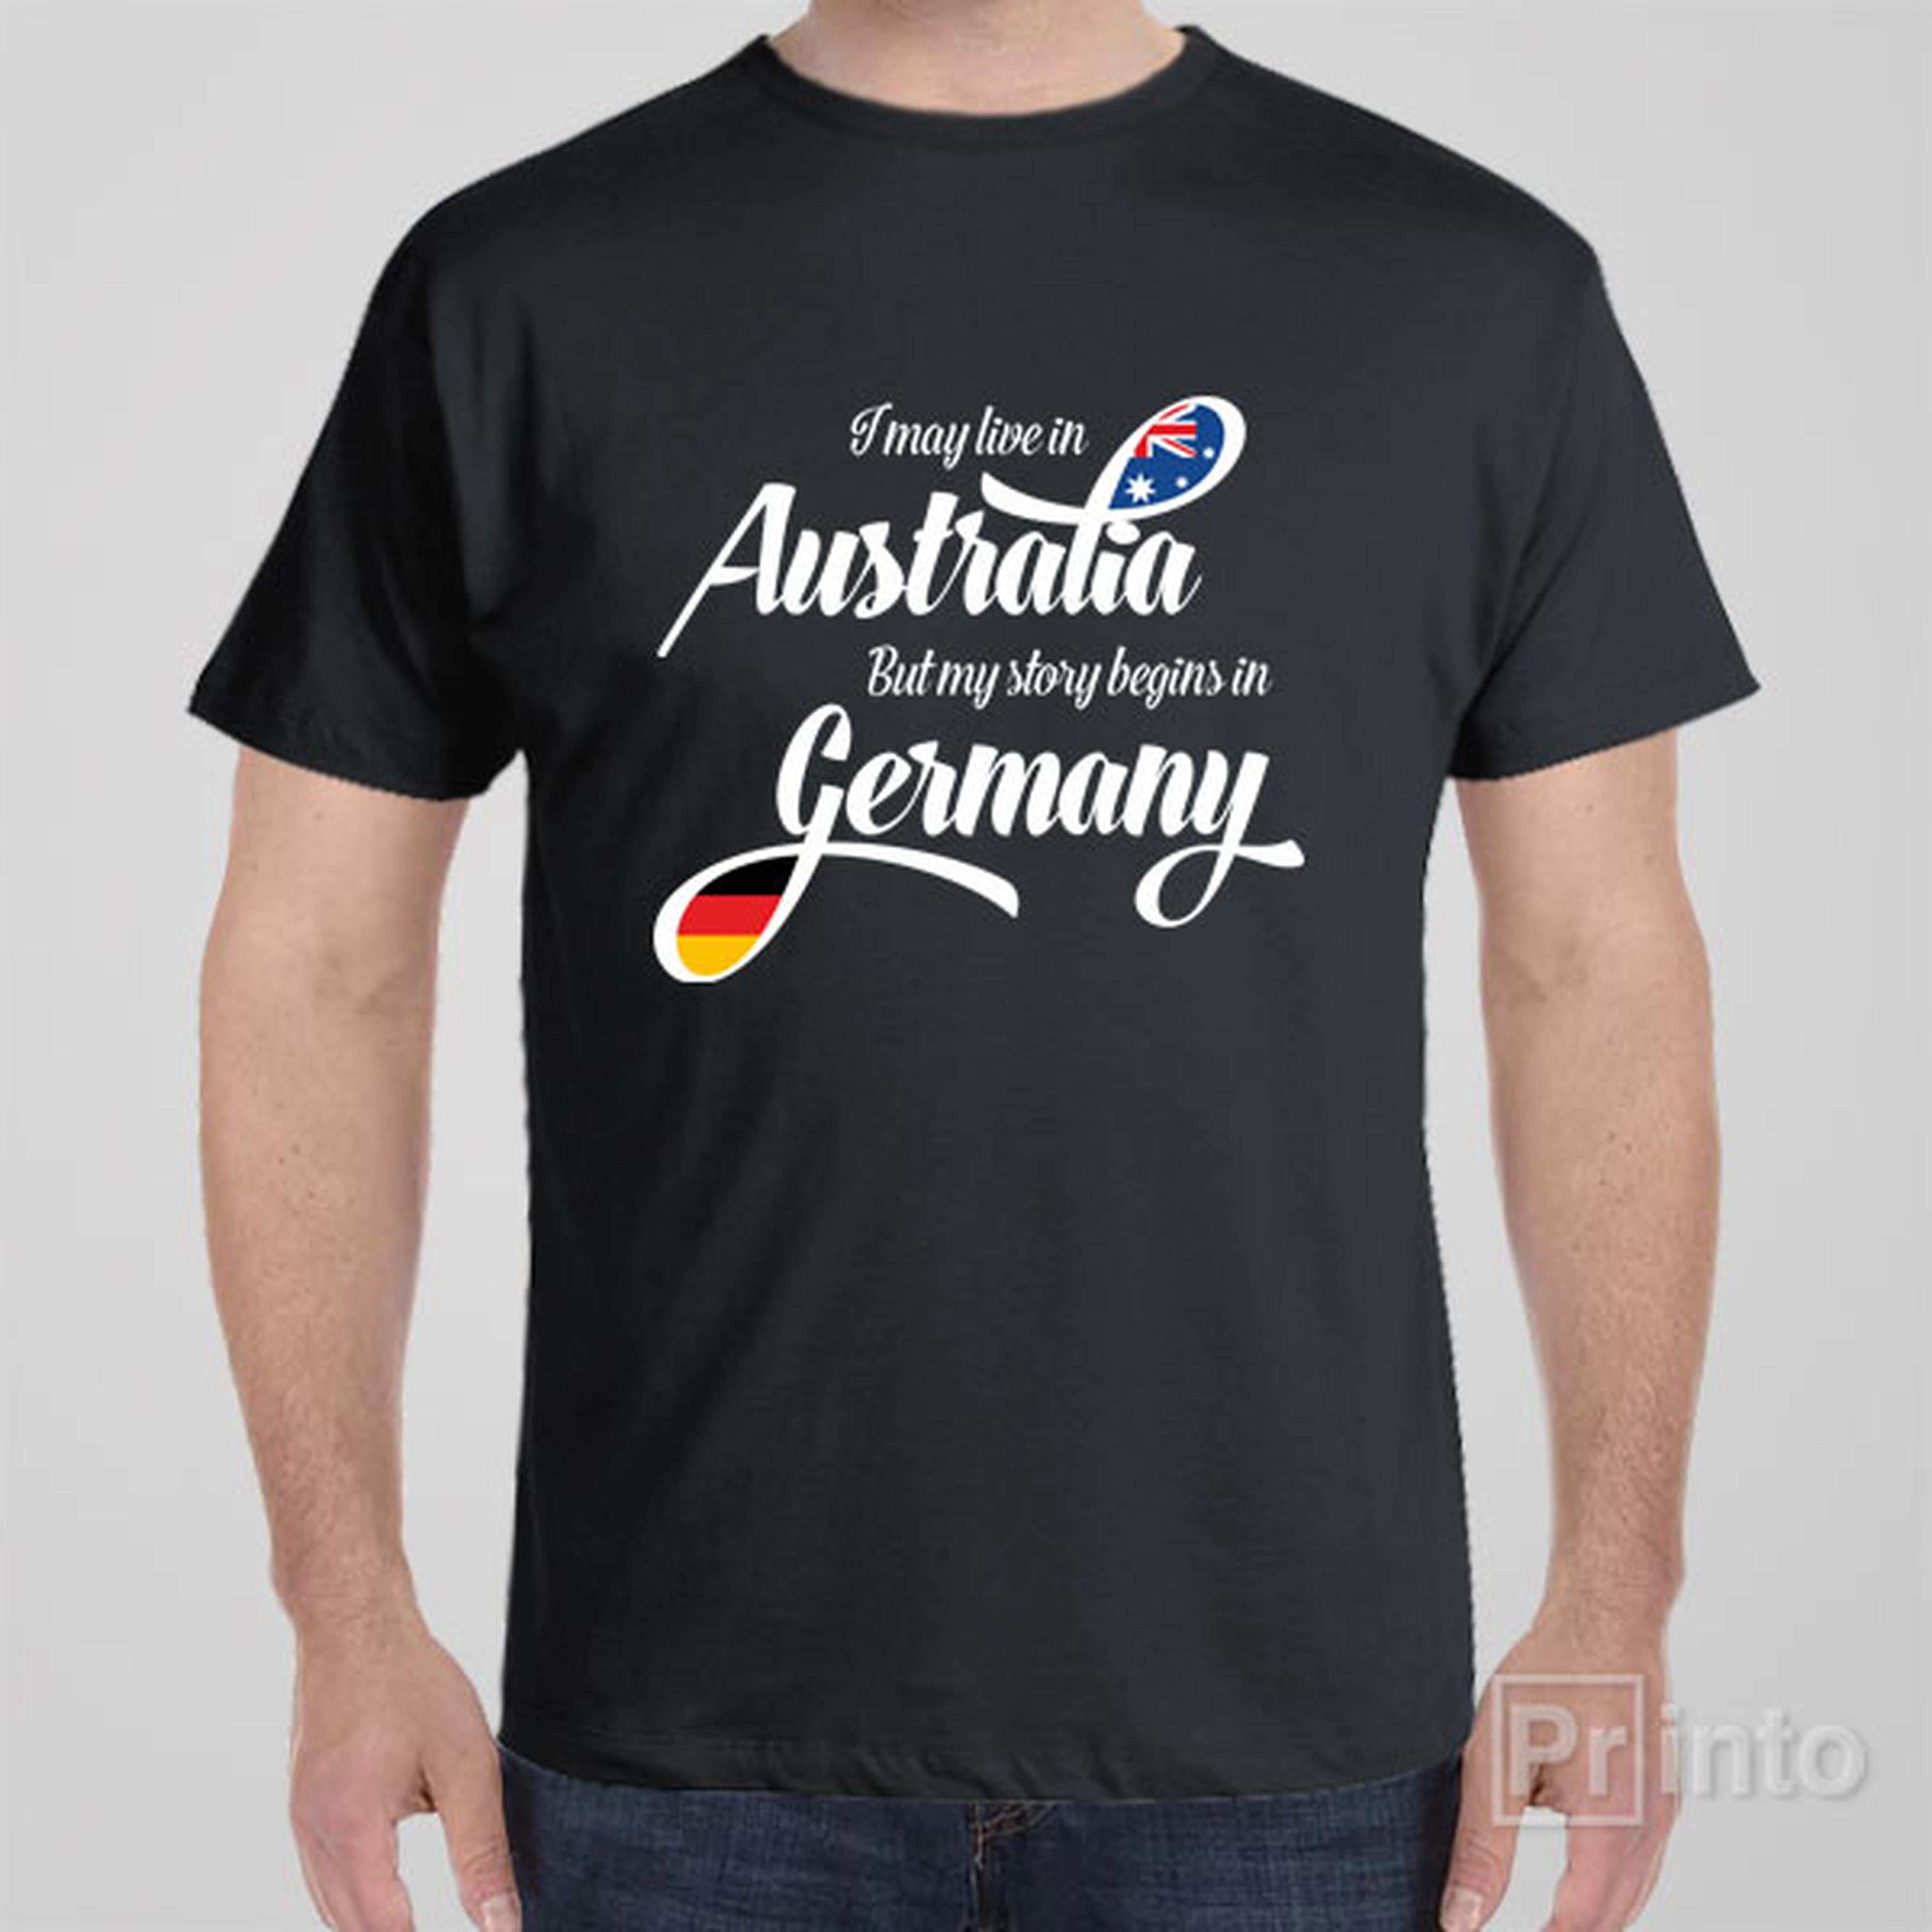 i-may-live-in-australia-but-my-story-begins-in-germany-t-shirt